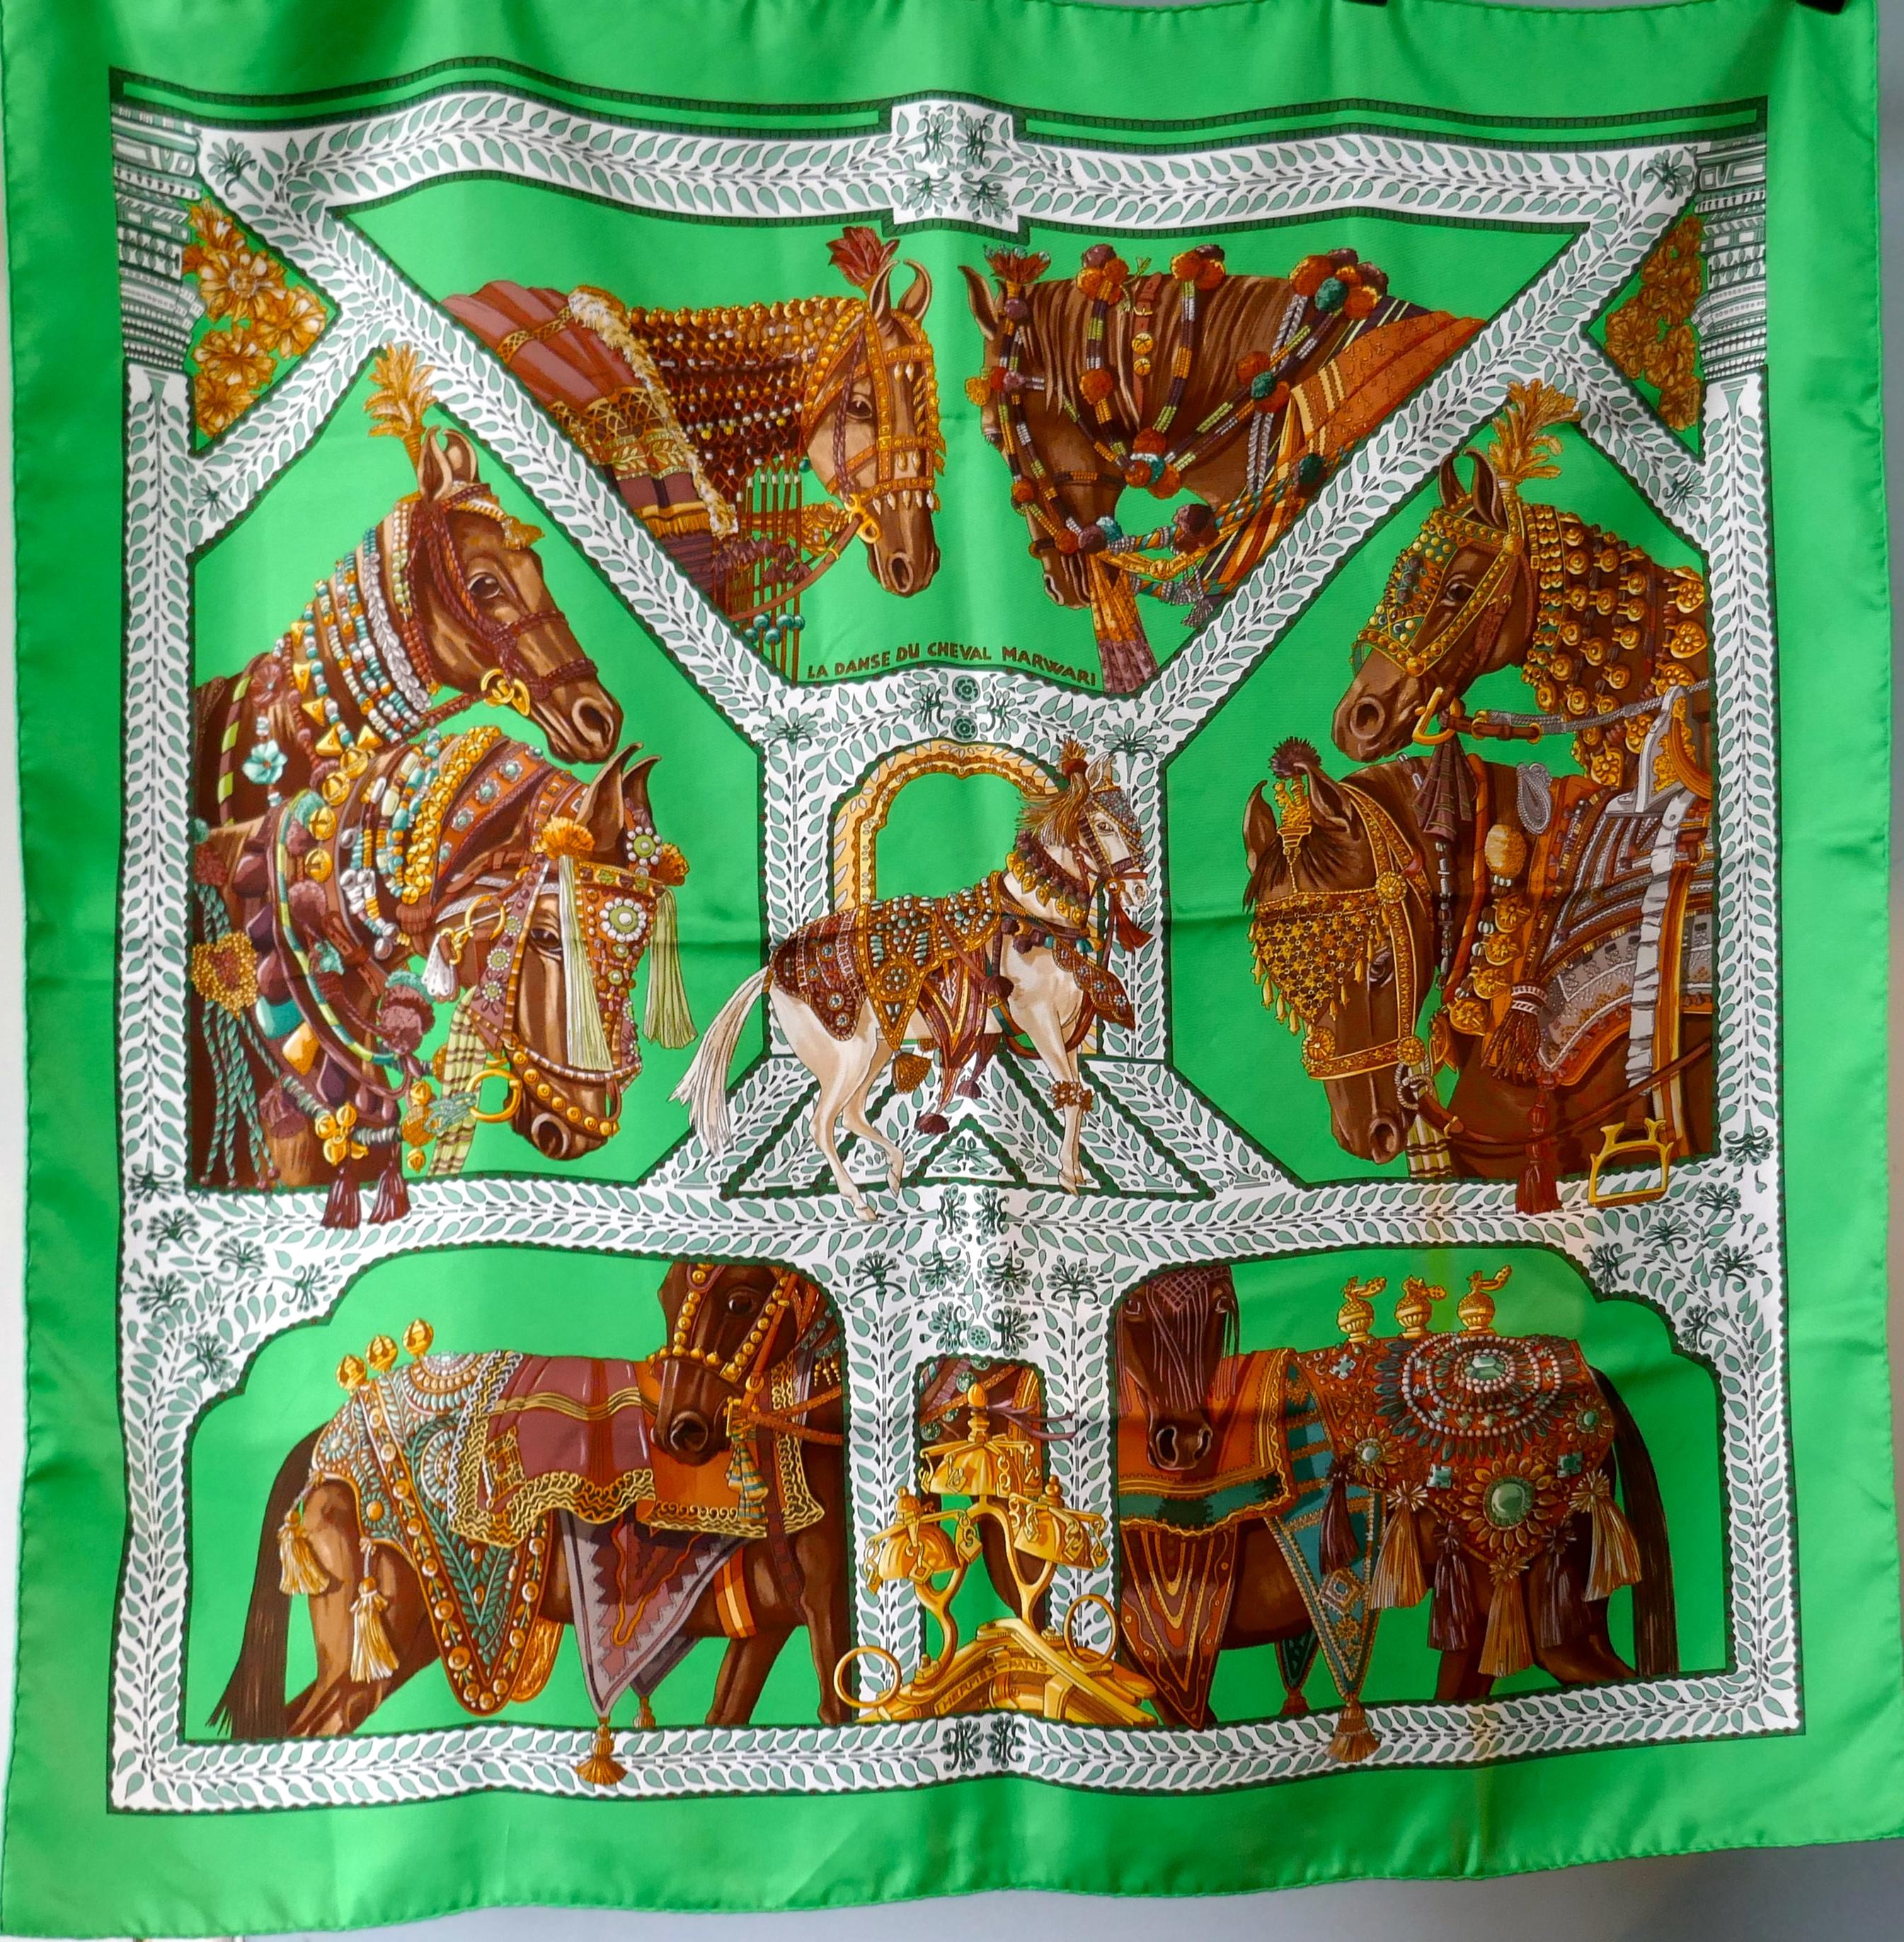 Very Rare Hermes Black Silk Scarf “Danse du Cheval Marwari” by Annie Faivre, 2008

Beautiful unworn Hermes “Danse du Cheval Marwari” by Annie Faivre. 

This is an exquisite and stunning Green Brown and Orange Pallet, one for the collector, portrait